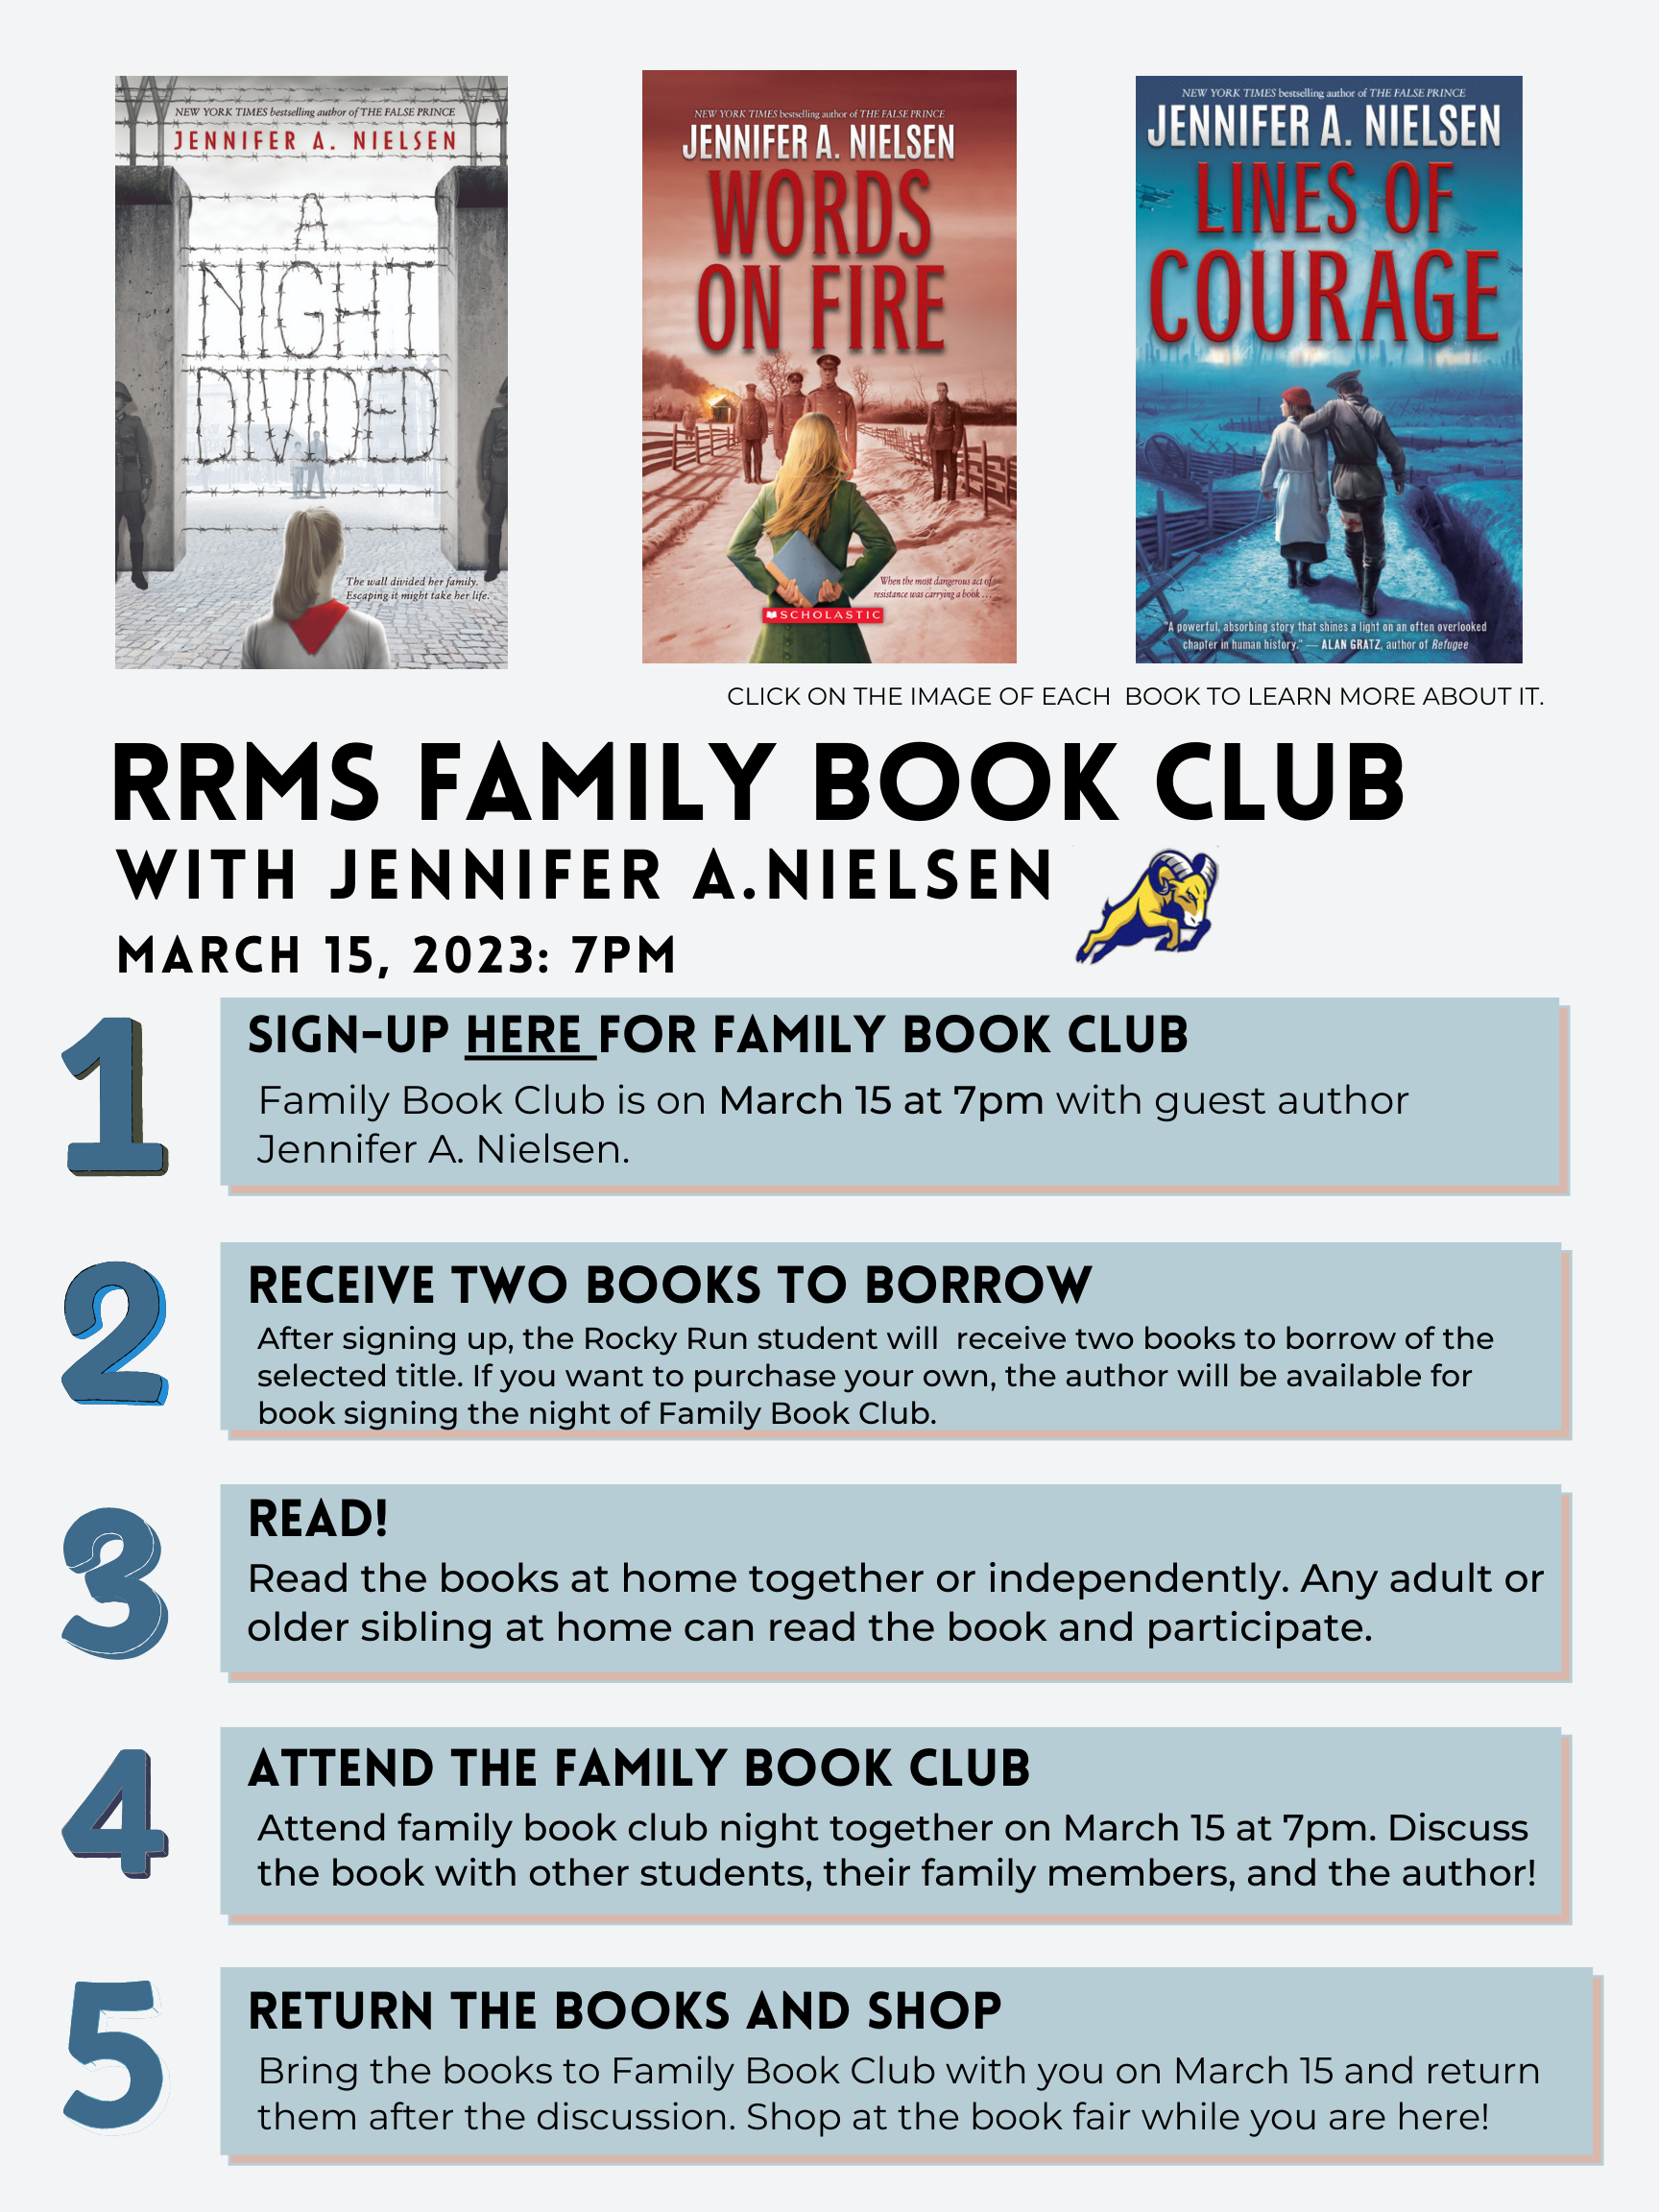 Flyer summarizing the steps to book club. Use the Google Form to sign up, receive 2 books to borrow or purchase your own, read the book, and attend Family Book Club on March 15 to discuss your book with others. The book fair will be open as well that night. Email agslevin@fcps.edu with any questions.